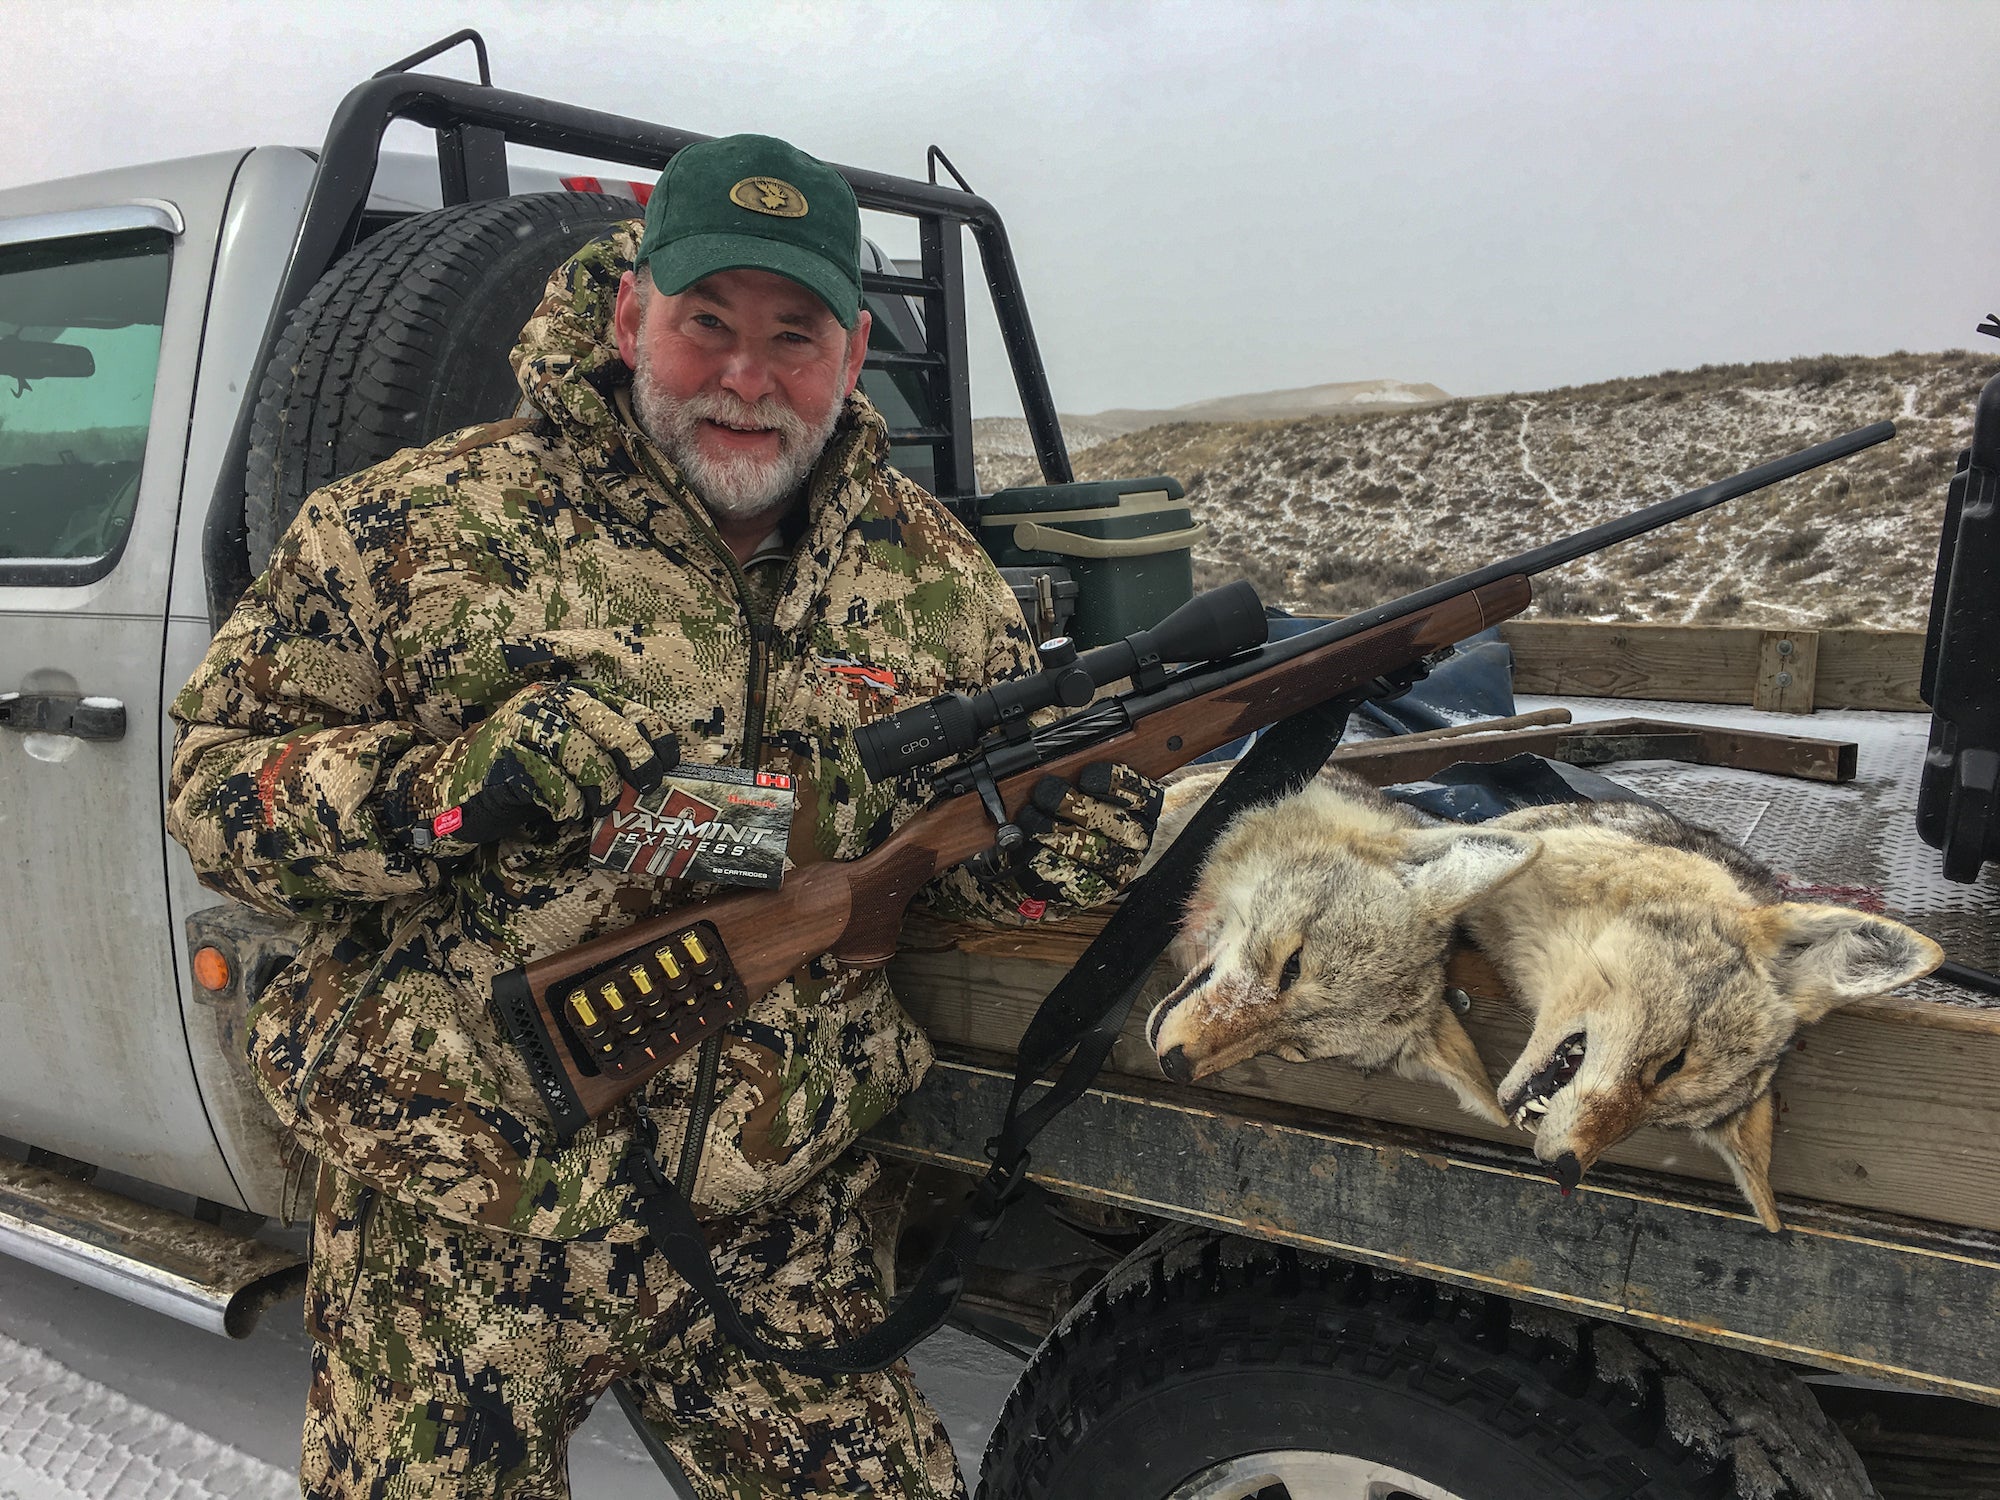 Hunter standing next to dead coyotes with a 6.5 creedmoor rifle.